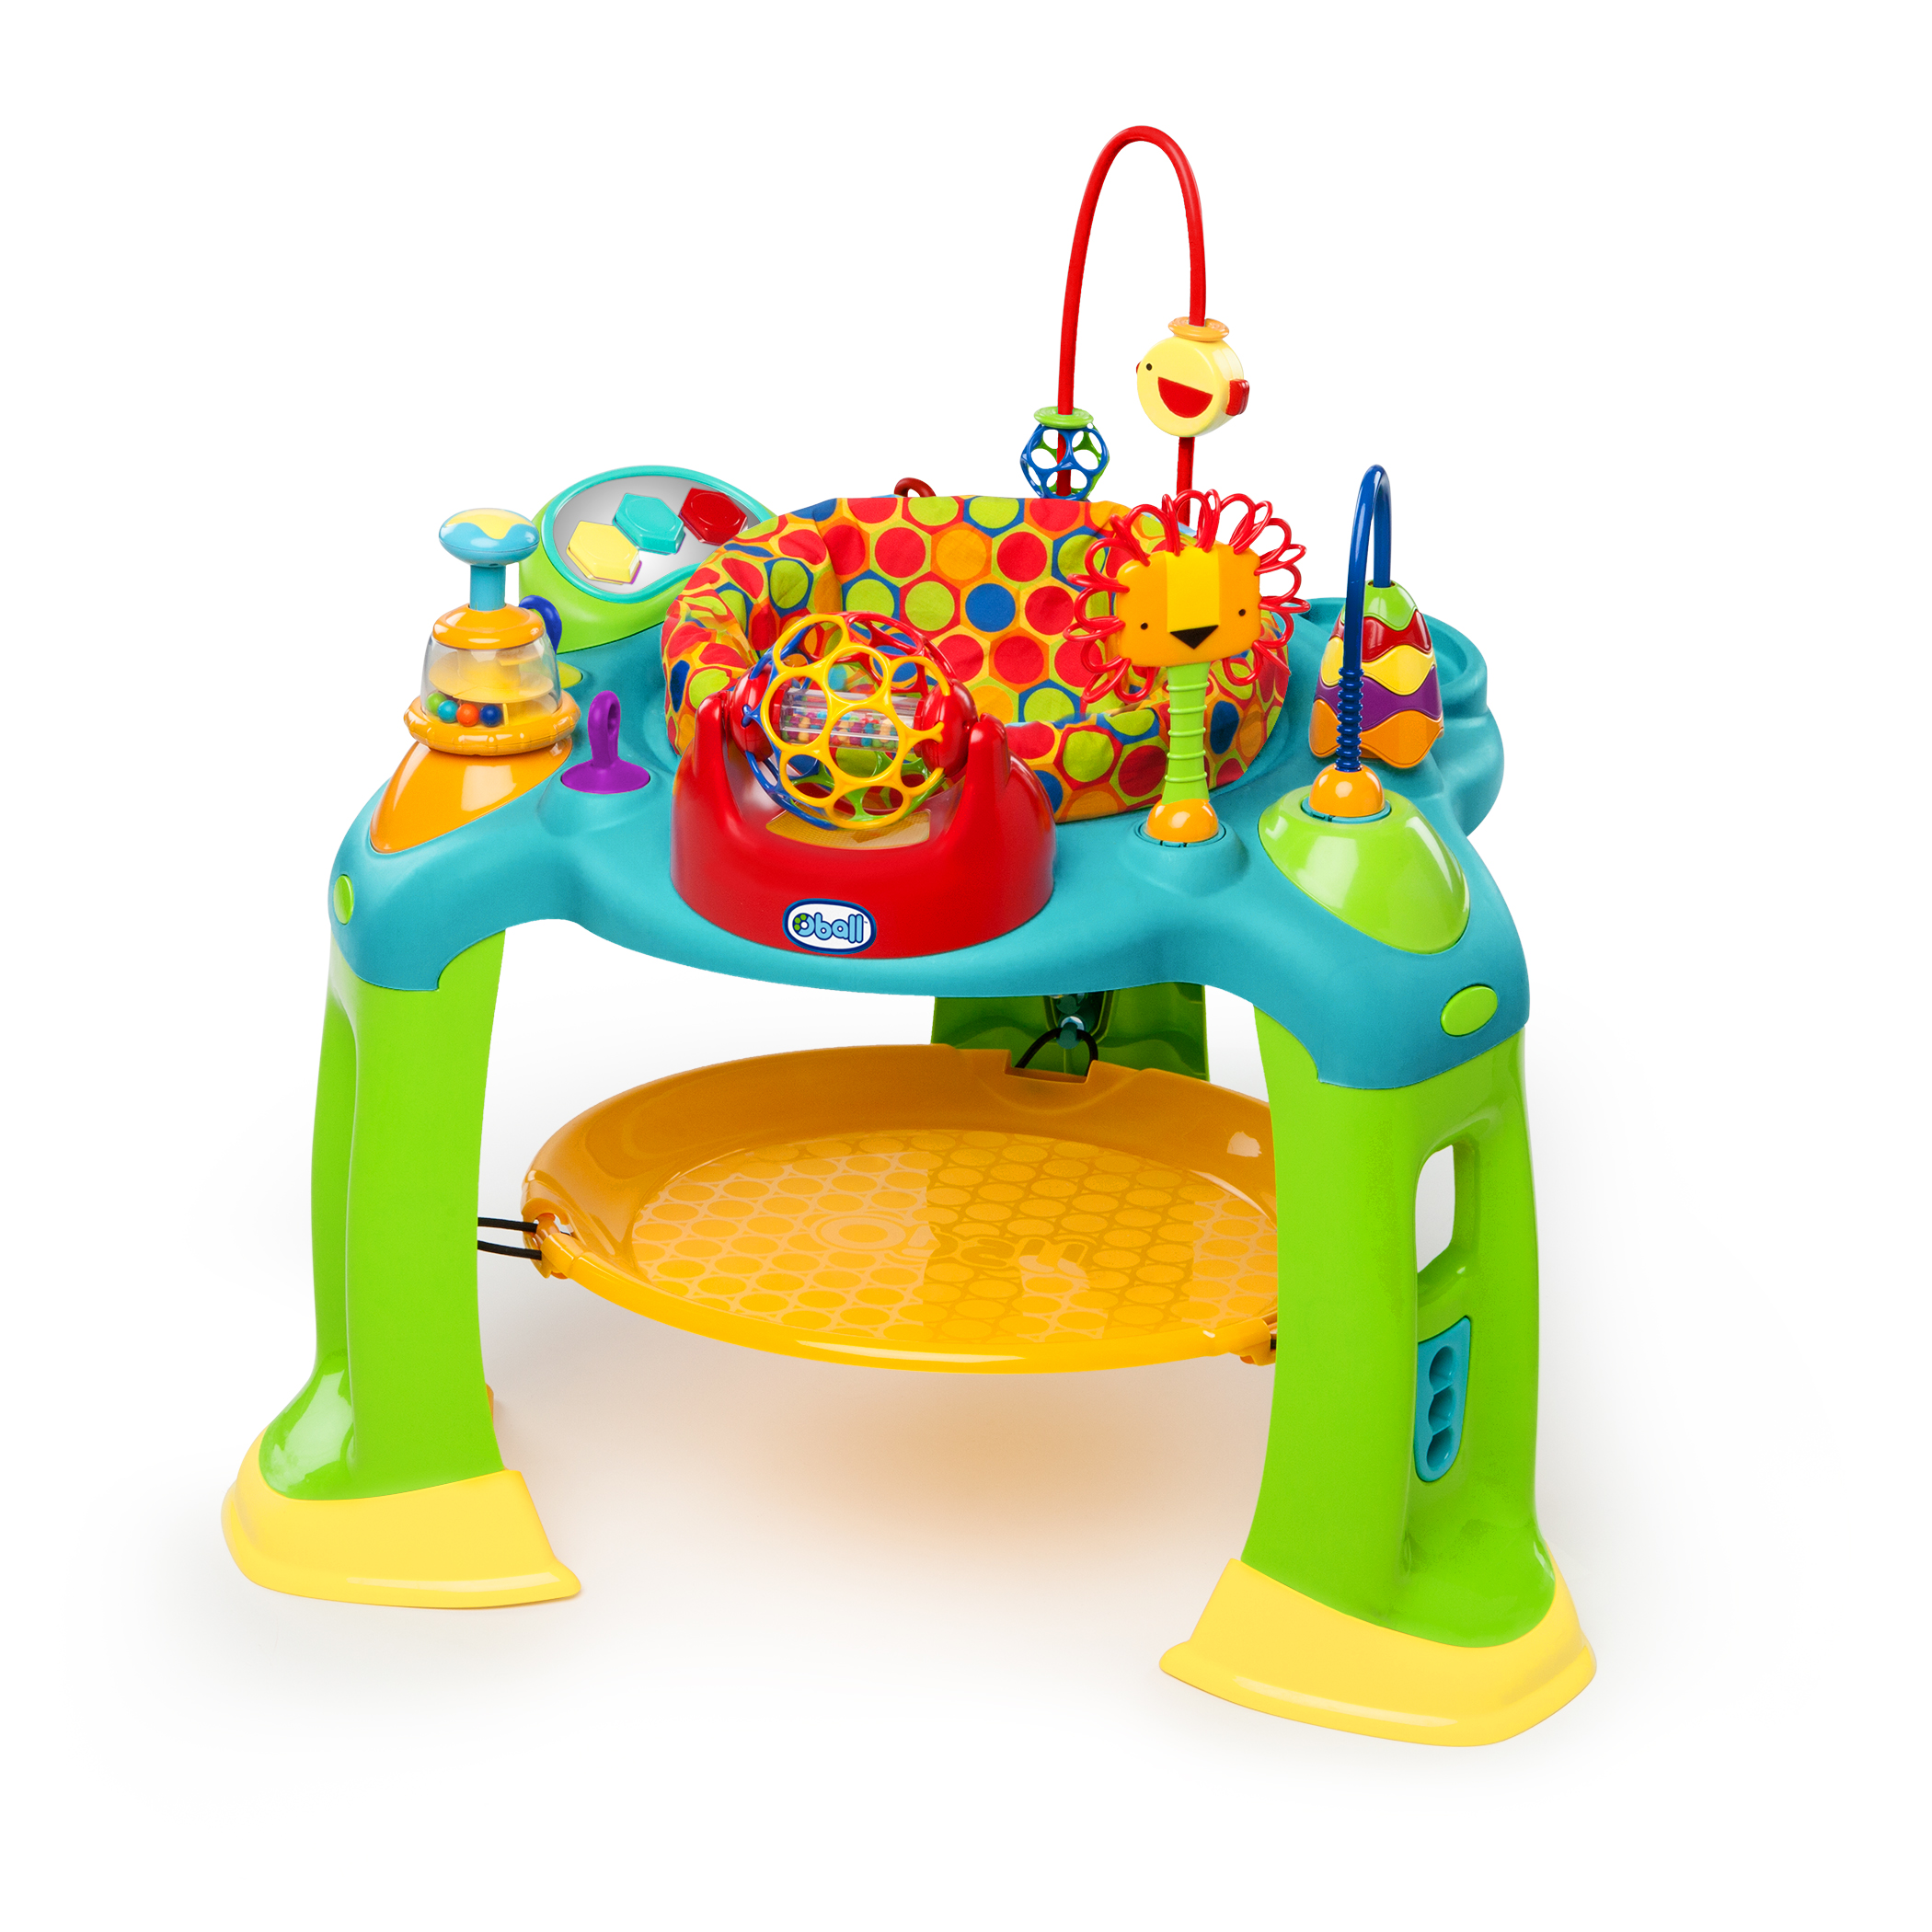 Bounce-O-Bunch Activity Center? - image 1 of 2